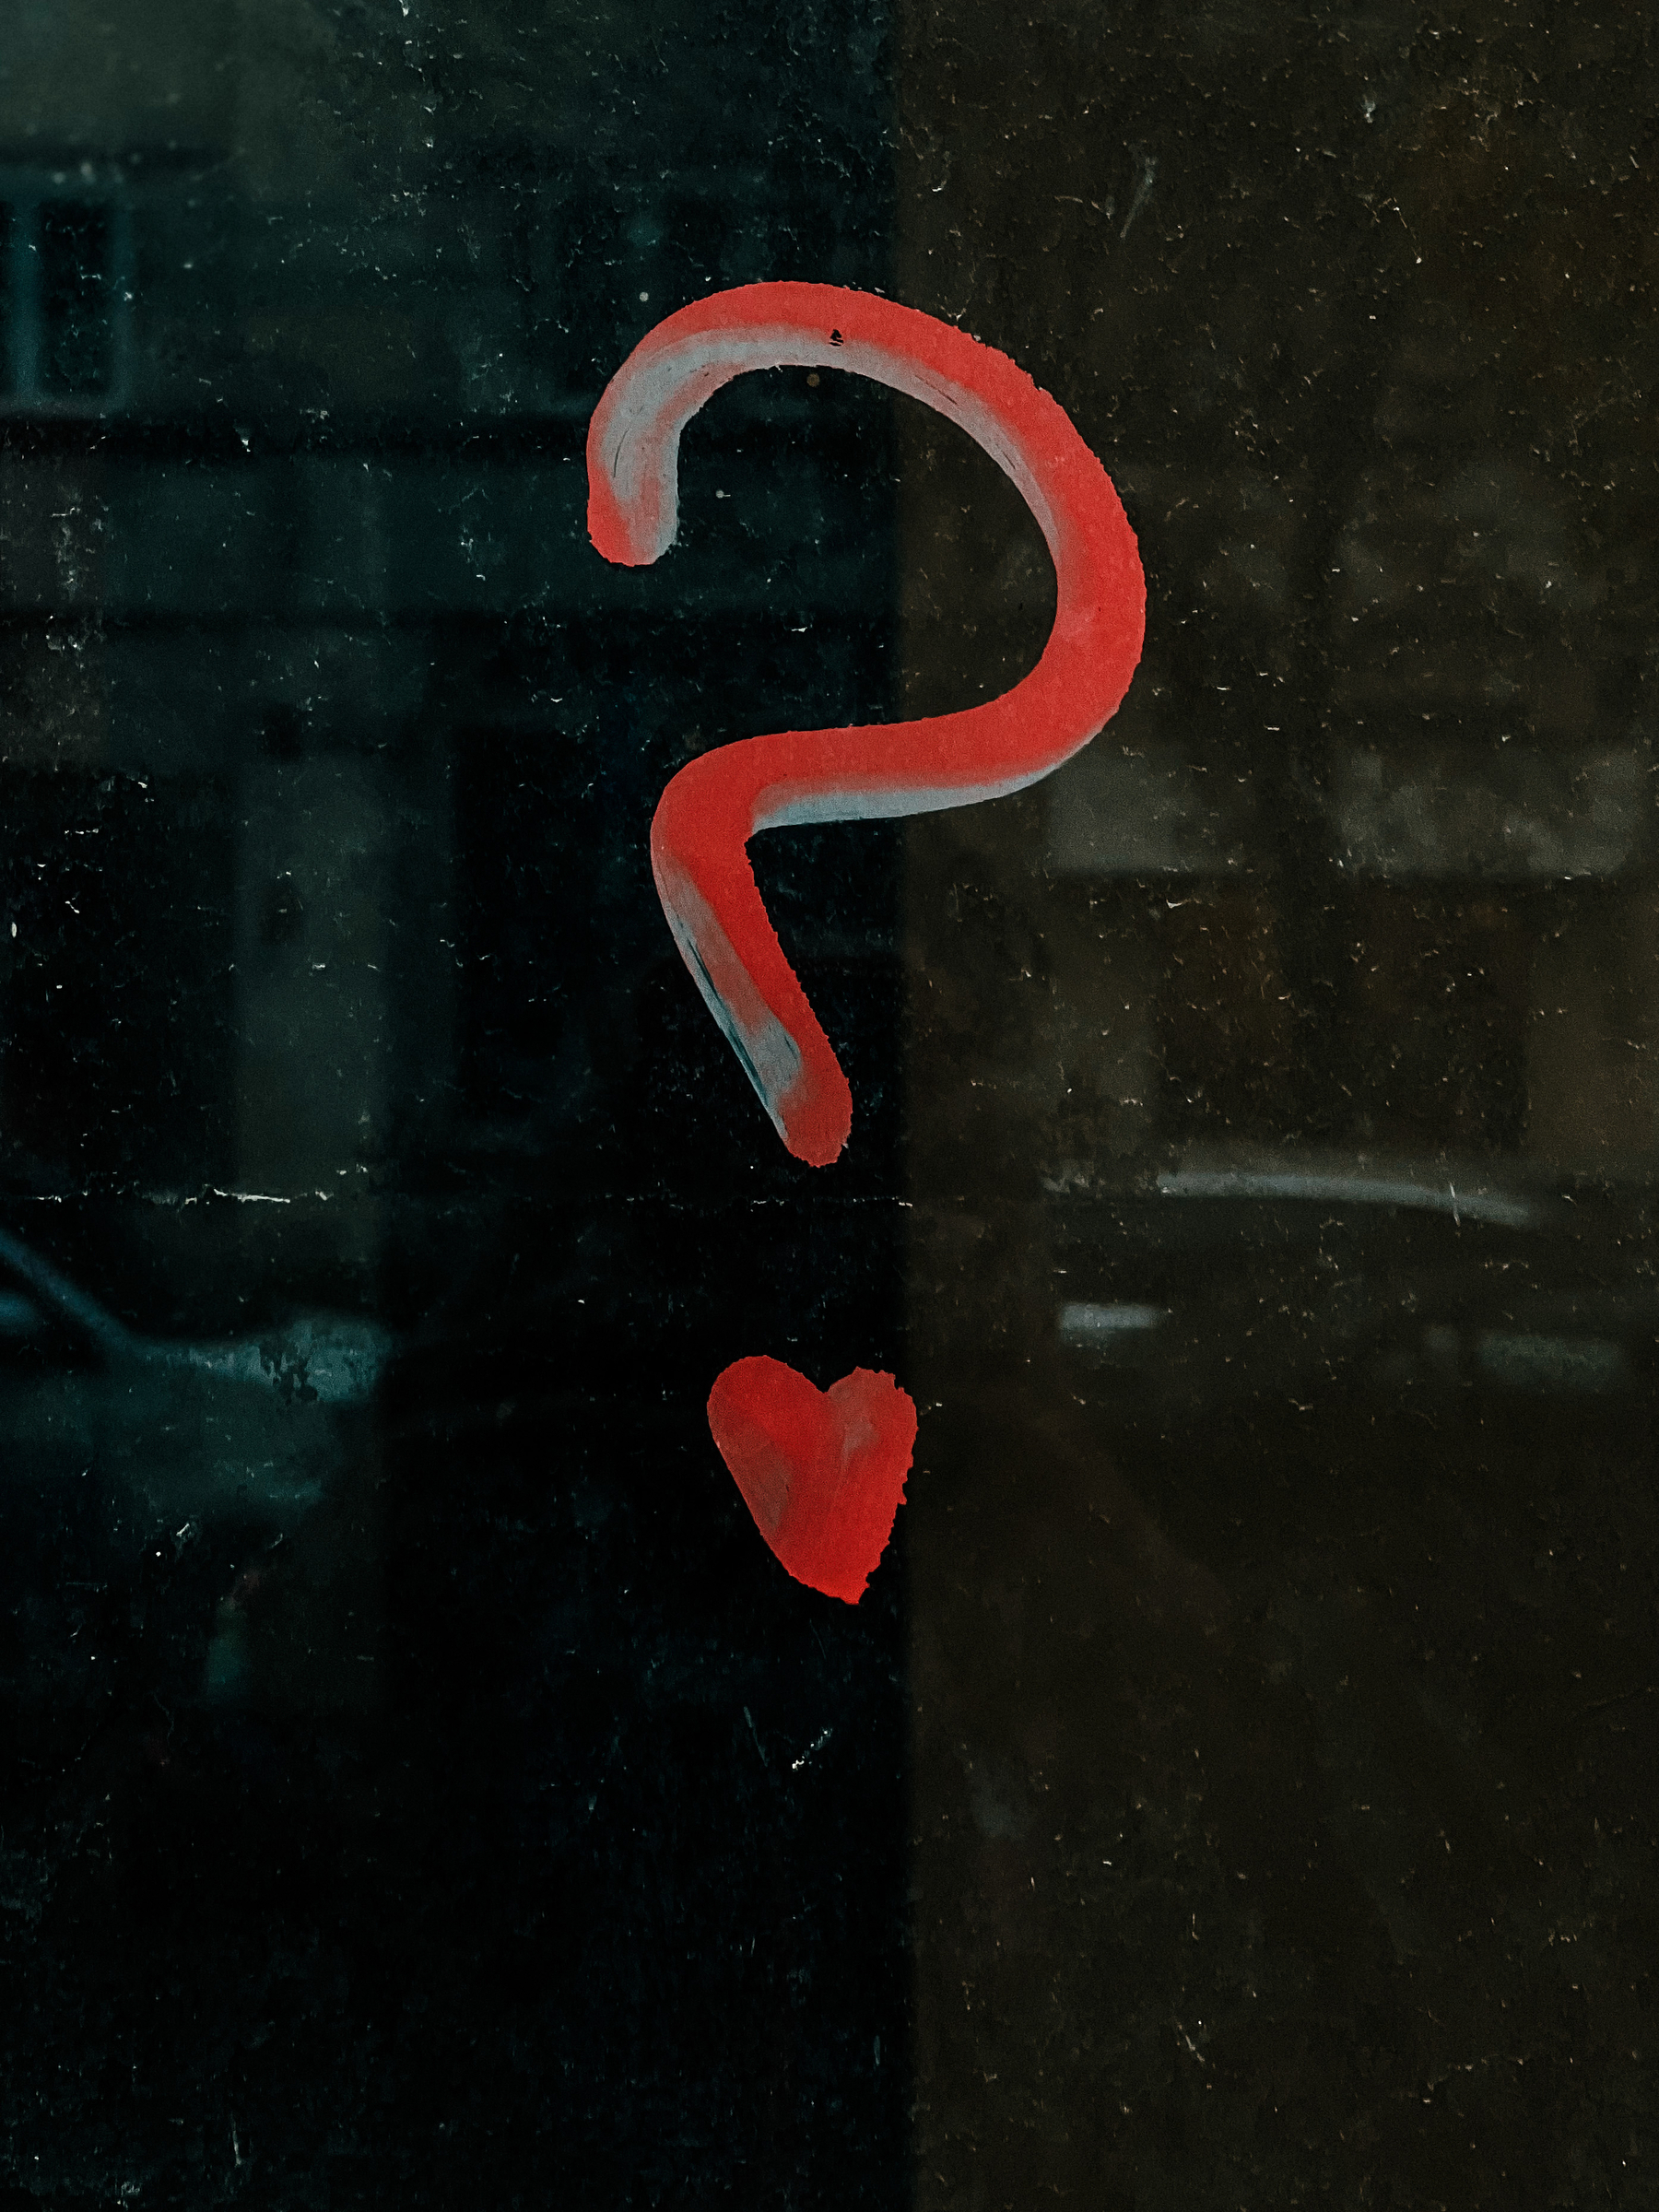 Graffiti of a question mark on a window, the dot on the question mark is a heart. 